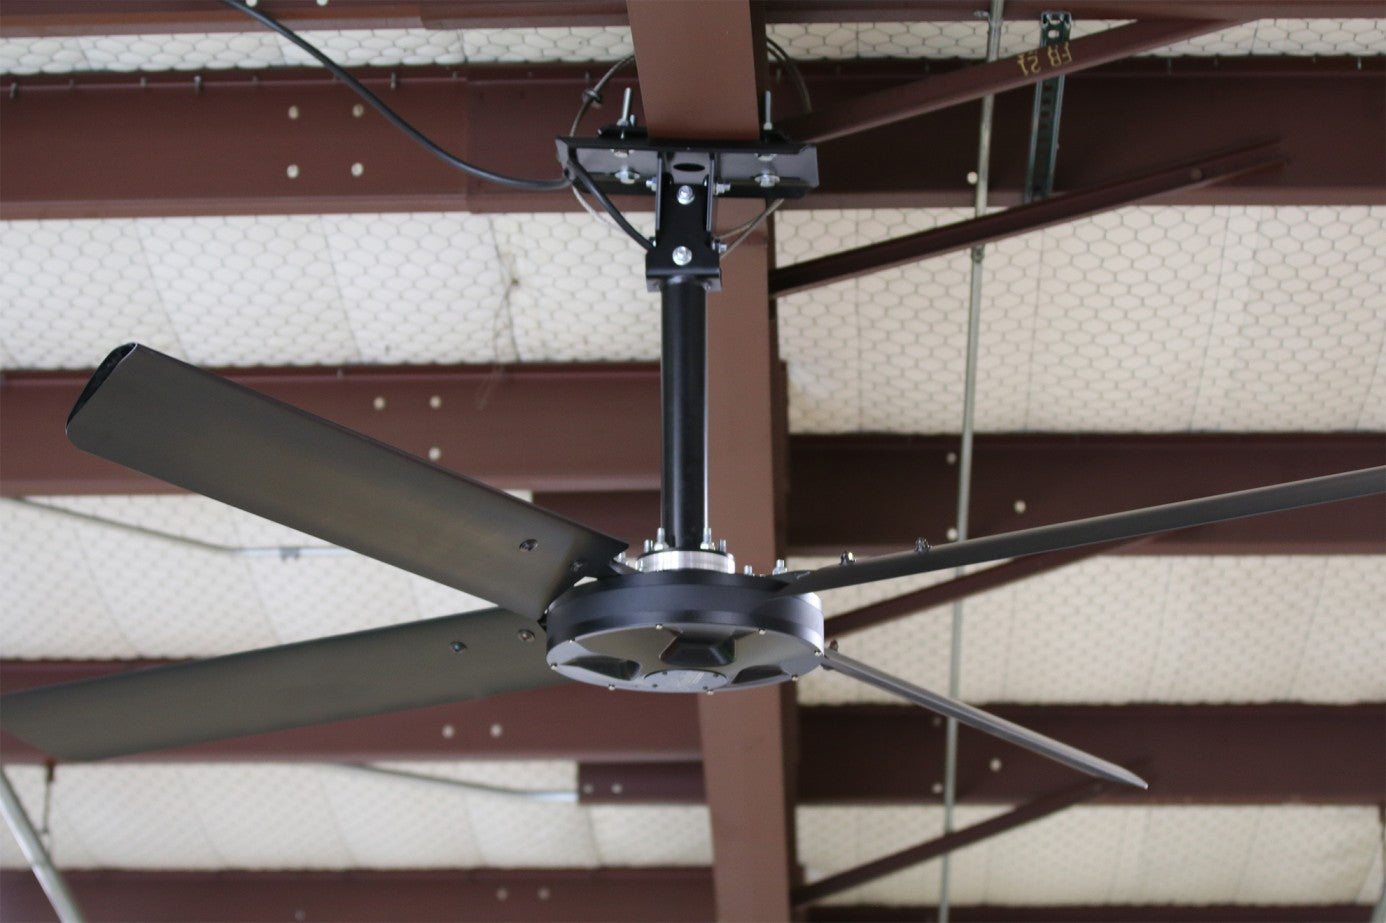 Ceiling fans for automotive service and repair shops